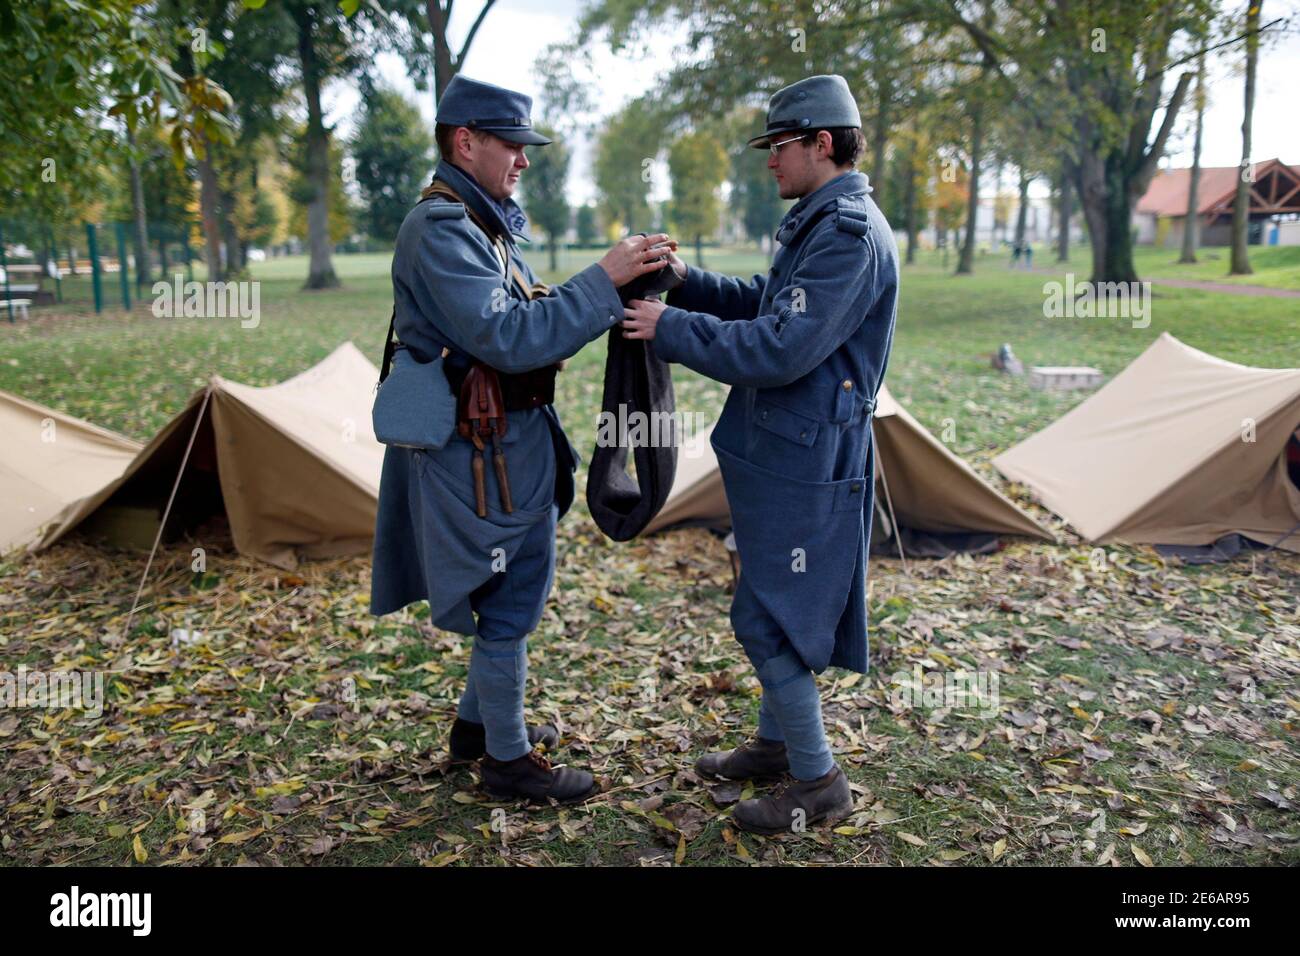 World War One Historical Association '14-18 en Somme' members Guillaume (L) and Andy, dressed with vintage army uniforms as Poilu (French soldier in World War I) fold a blanket at their bivouac camp in Fouilloy, Northern France, November 10, 2013. The historical association '14-18 en Somme' was created in August 2009 by French history teacher Sylvain Pinard with the aim of keeping alive the memory of the soldiers of World War One, and promoting understanding of the battles of the Great War. Armed with their motto 'Never forget, always remember', the 30 members live, eat and sleep in the same c Stock Photo